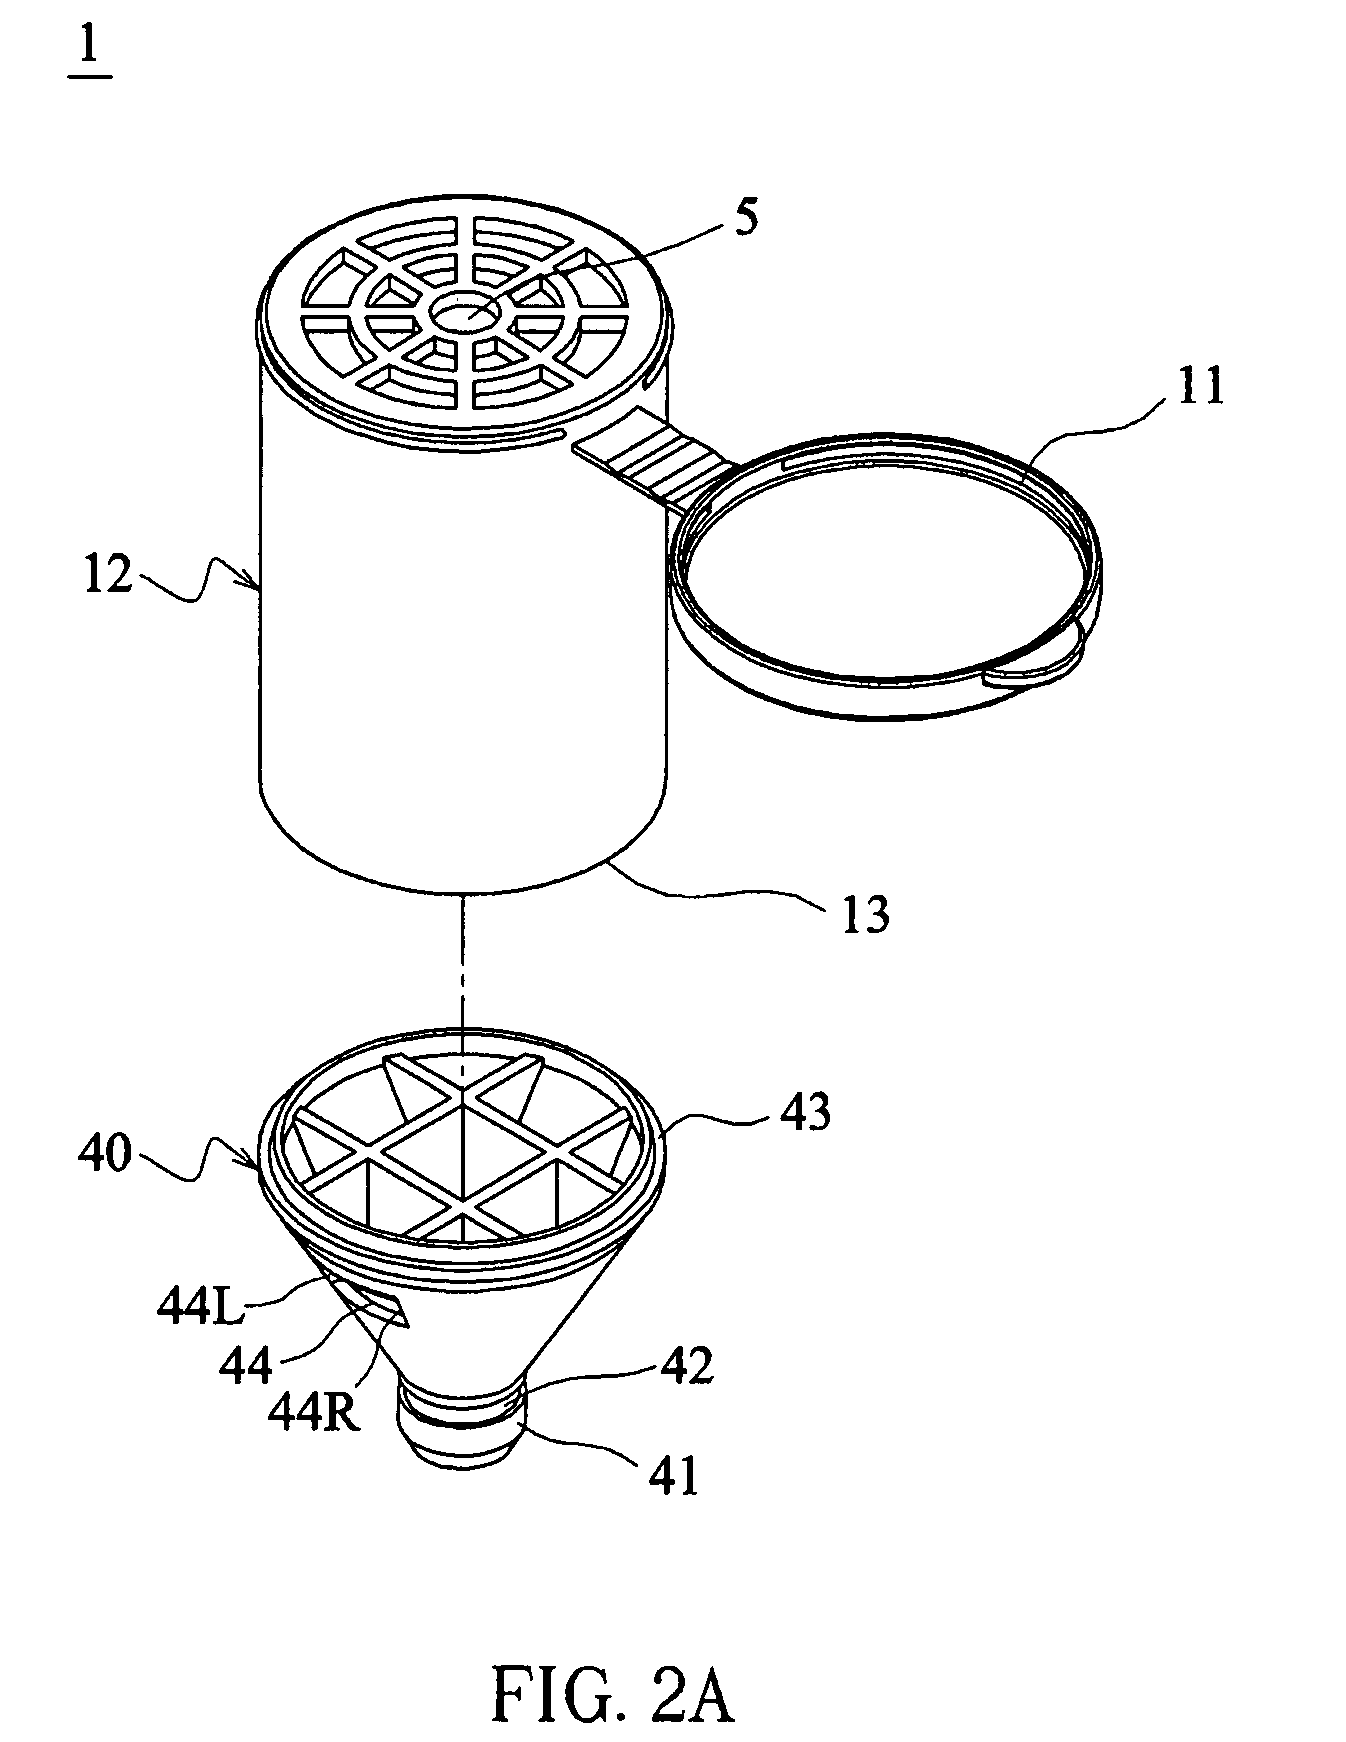 Can-filter structure of oxygen concentrator